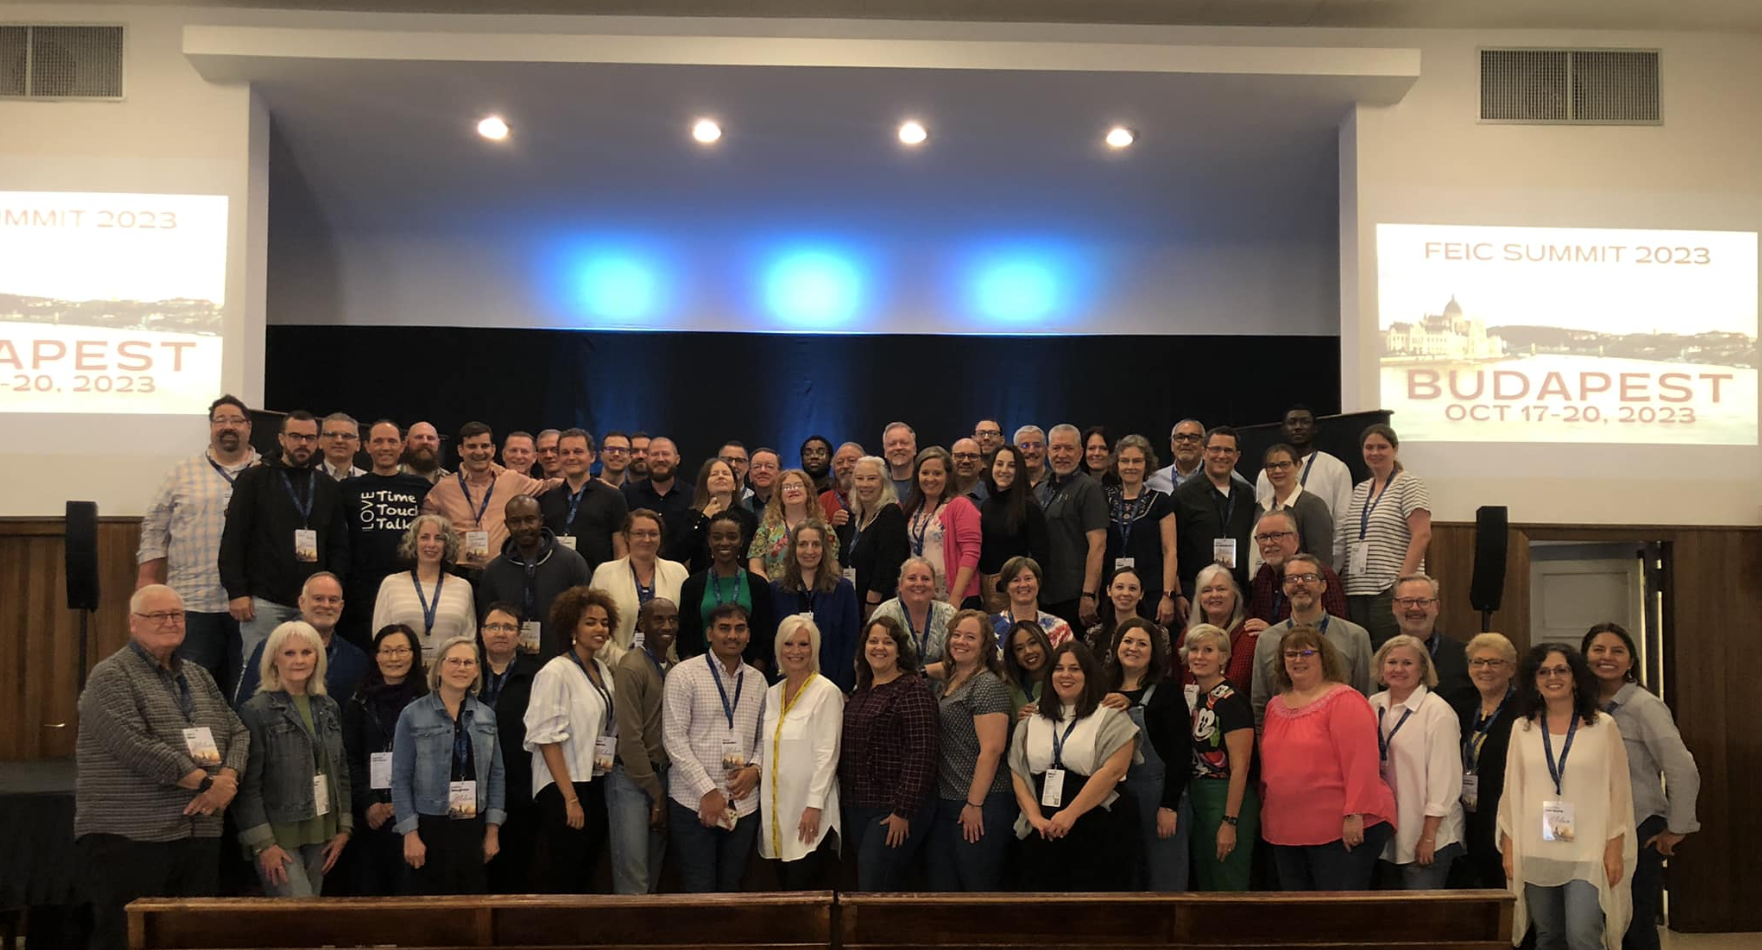 Thank you for strengthening 75 pastors and leaders in Europe!